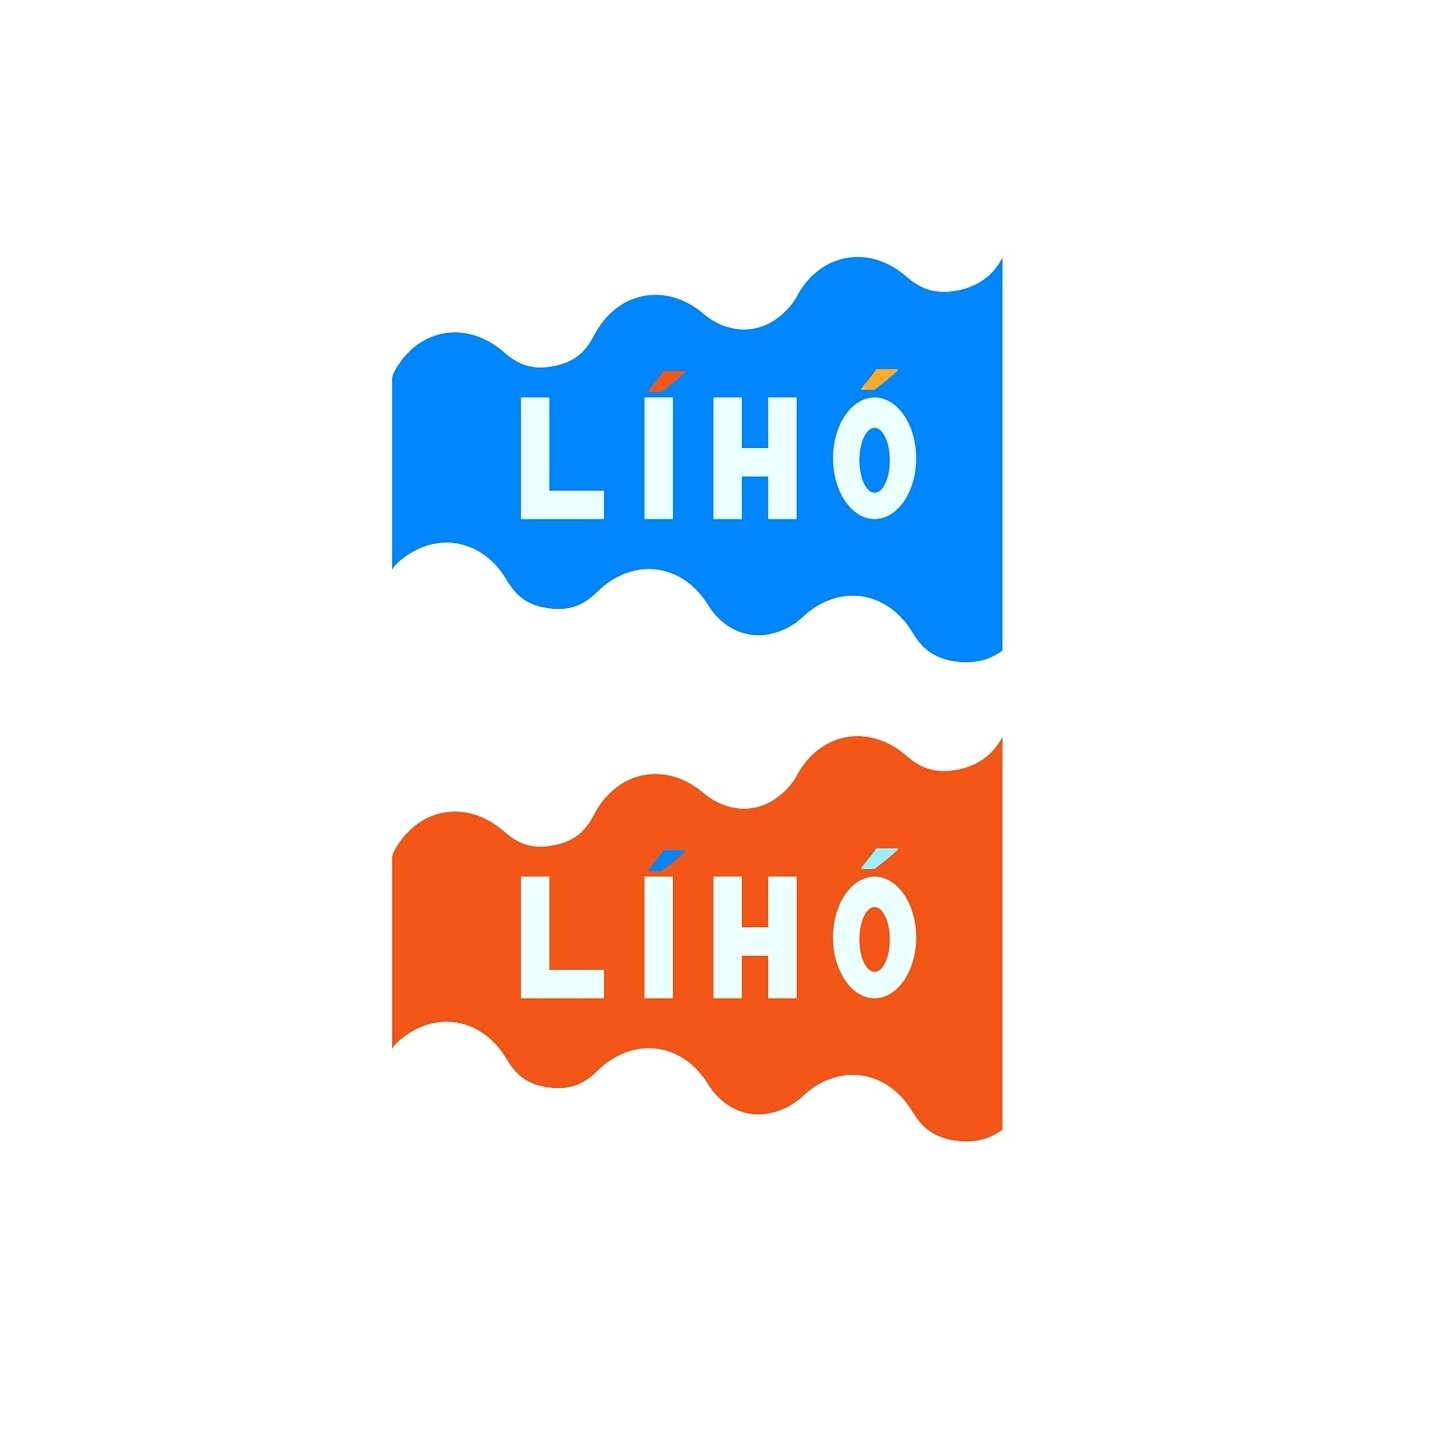 LOGO #3

L&Iacute;H&Oacute; - means hello in Taiwanese. Once so vibrantly used by the generations that have passed and the supposed mother tongue of millions, now slowly perishing. L&Iacute;H&Oacute; needs to be said out loud and proud. It's no longe